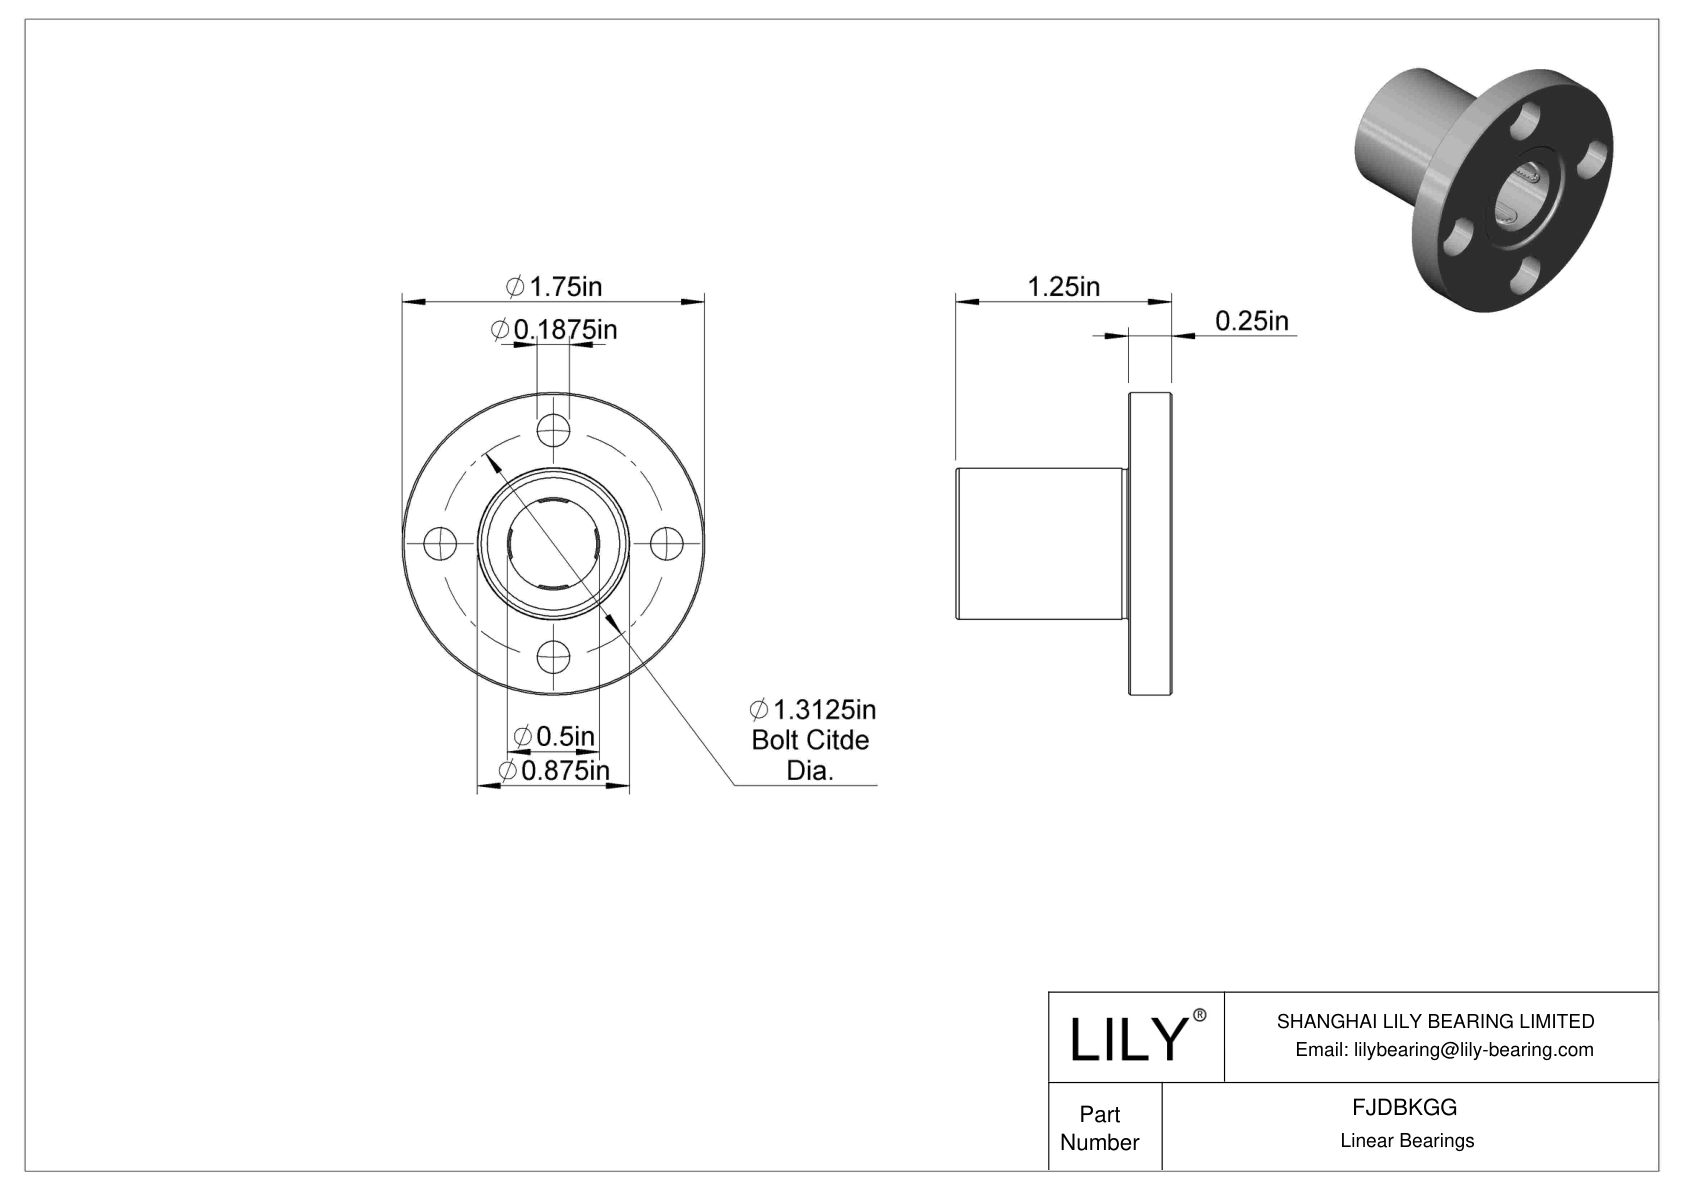 FJDBKGG Corrosion-Resistant Flange-Mounted Linear Ball Bearings cad drawing